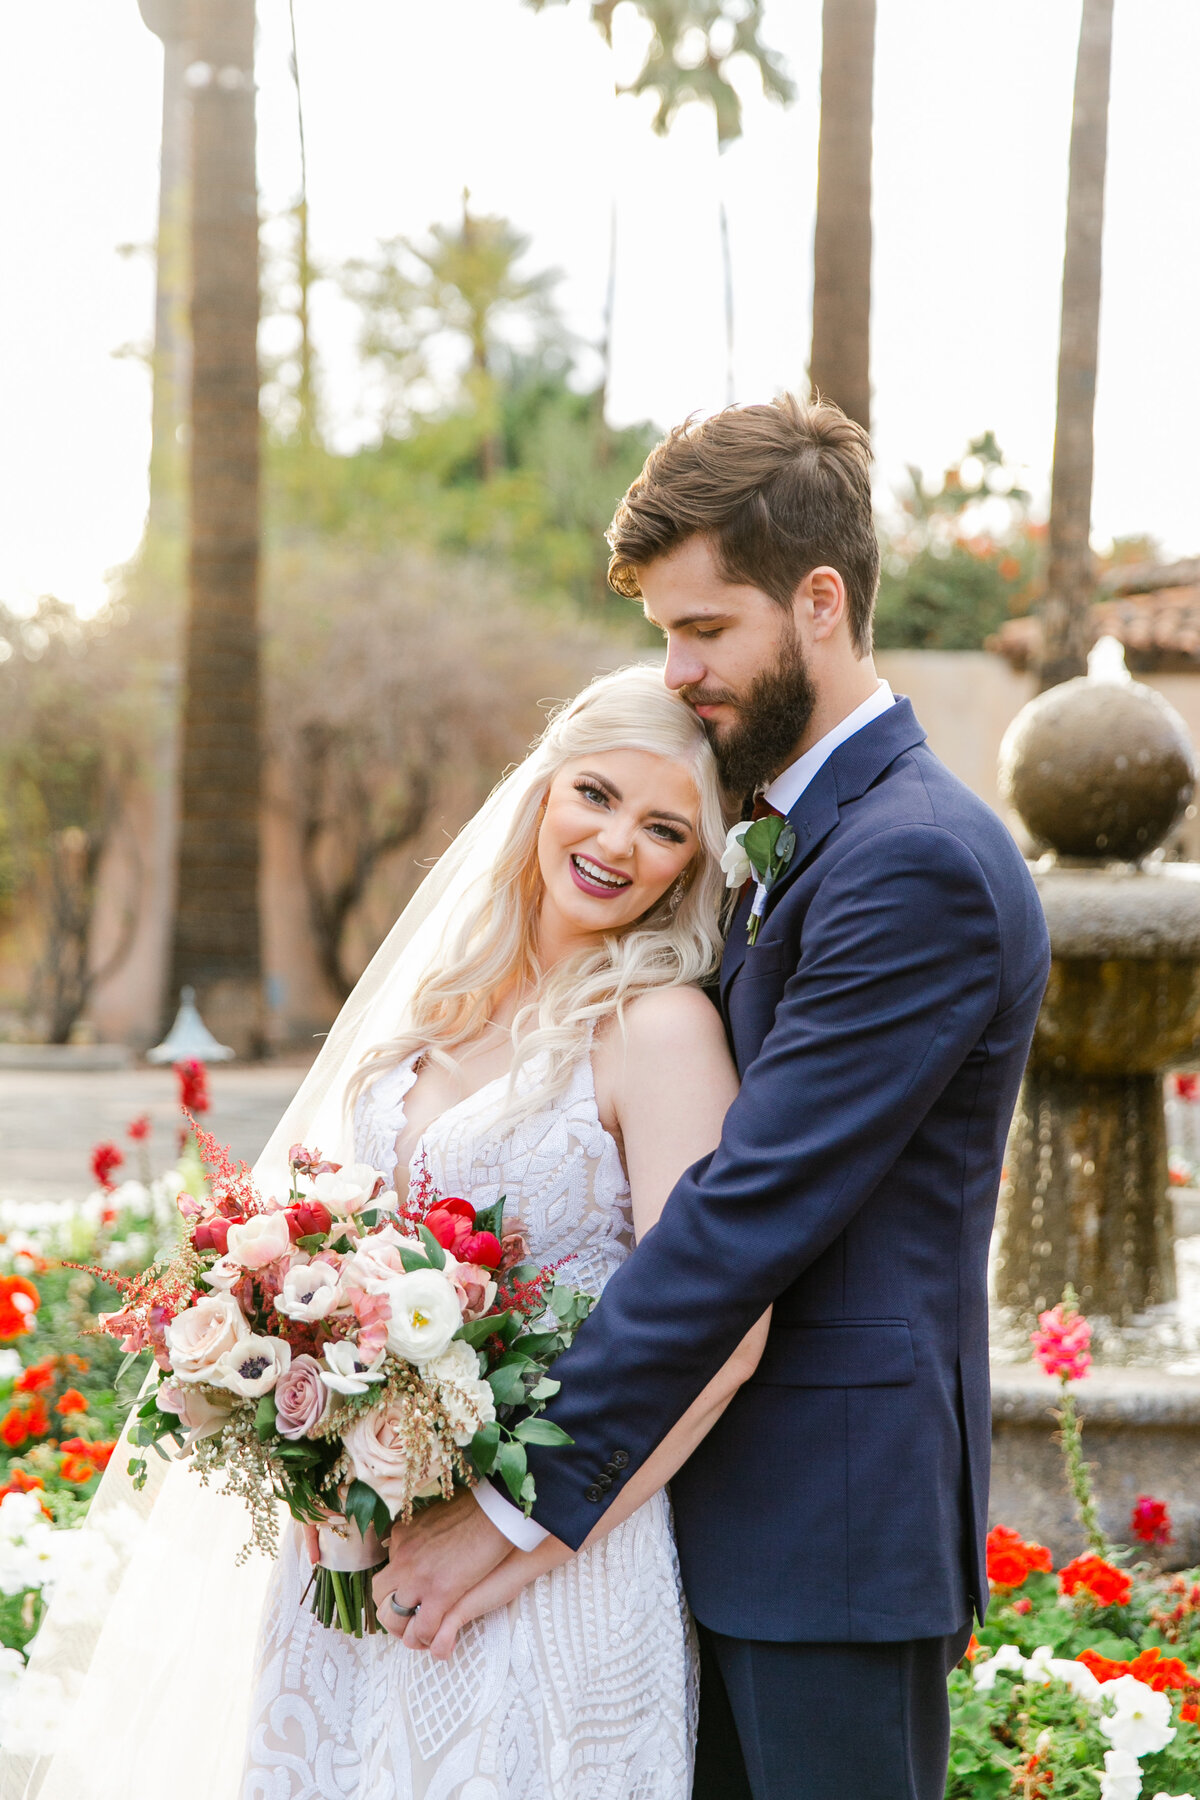 Karlie Colleen Photography - The Royal Palms Wedding - Some Like It Classic - Alex & Sam-546